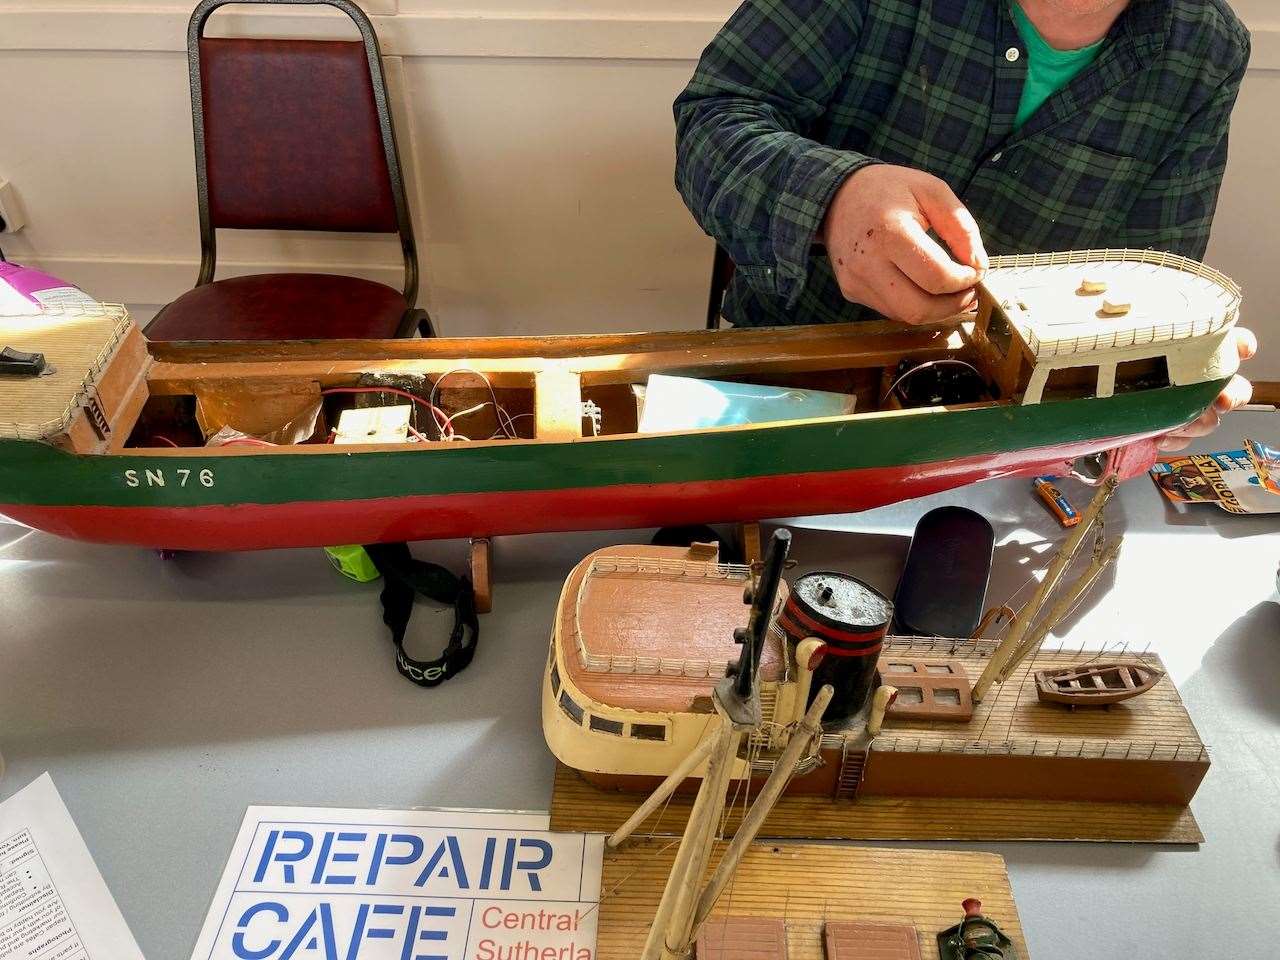 Some 20 items were brought into last Saturday’s Repair Clinic, including this wooden model of a boat.